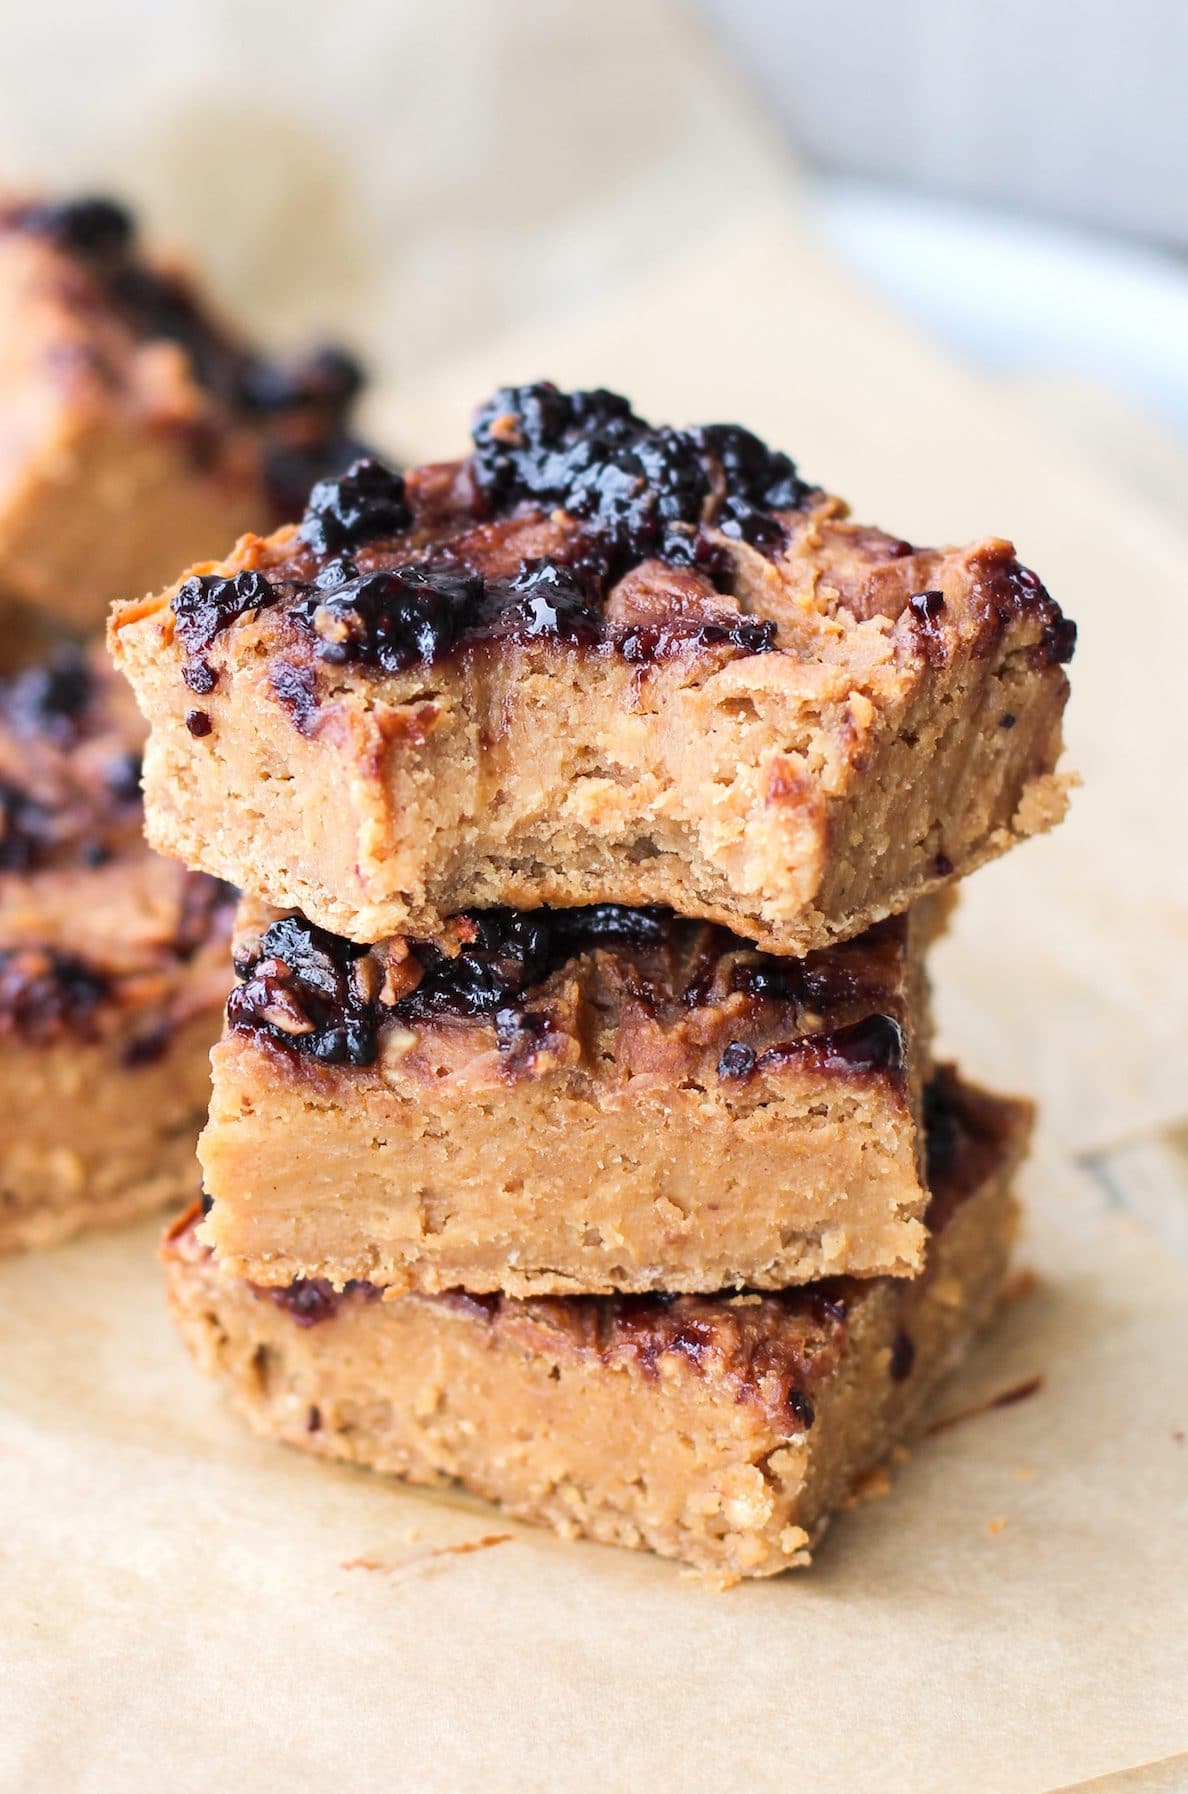 These Healthy Peanut Butter and Jelly Blondies are SUPER dense, fudgy, and rich. Also guilt-free, refined sugar free, high protein, gluten free and vegan! - Healthy Dessert Recipes at Desserts with Benefits